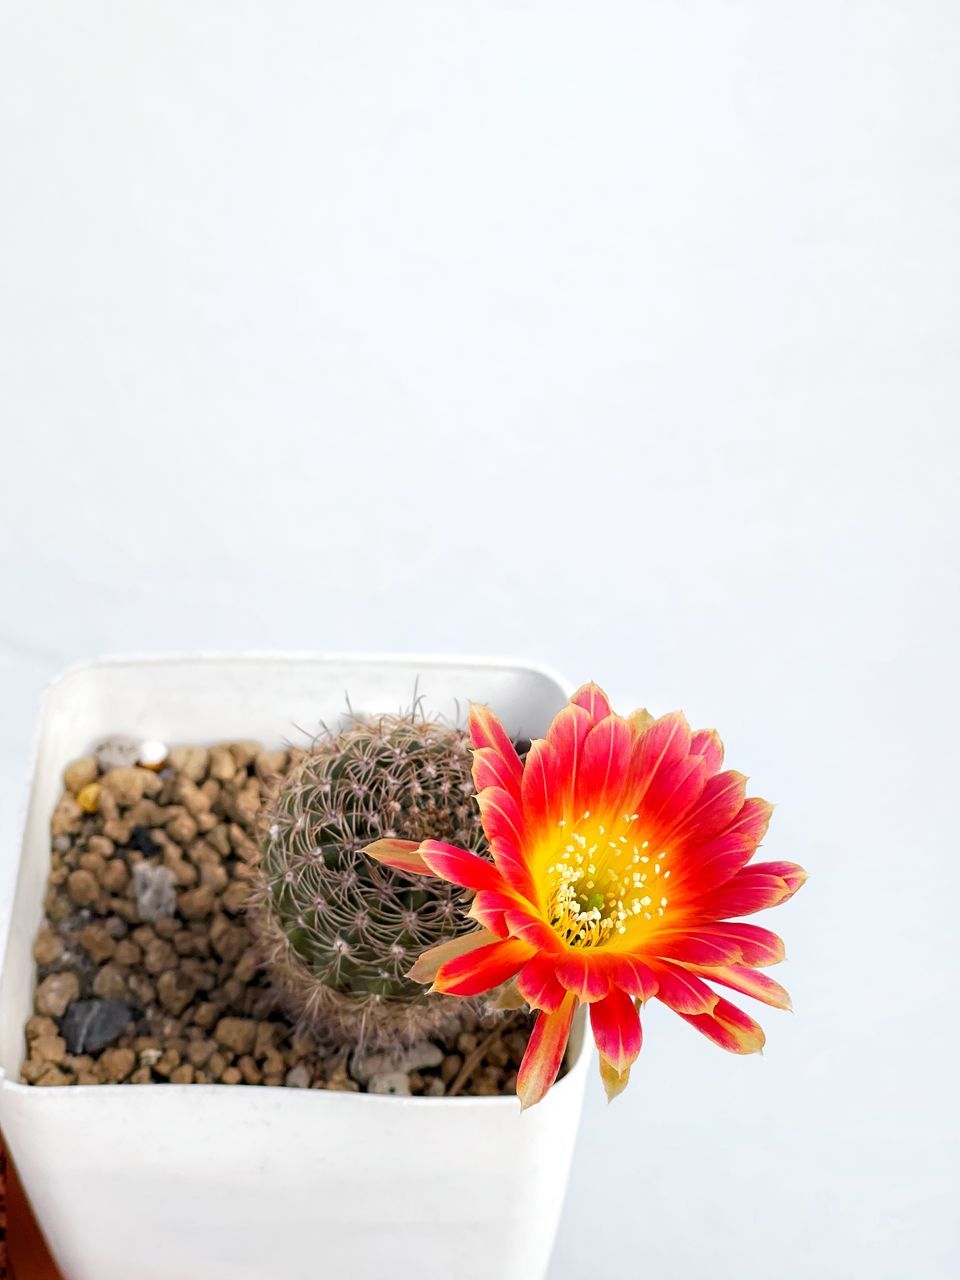 plant, flower, freshness, flowering plant, nature, studio shot, beauty in nature, flower head, copy space, indoors, flowerpot, no people, growth, white background, food and drink, container, food, fragility, close-up, houseplant, inflorescence, daisy, petal, seed, produce, cactus